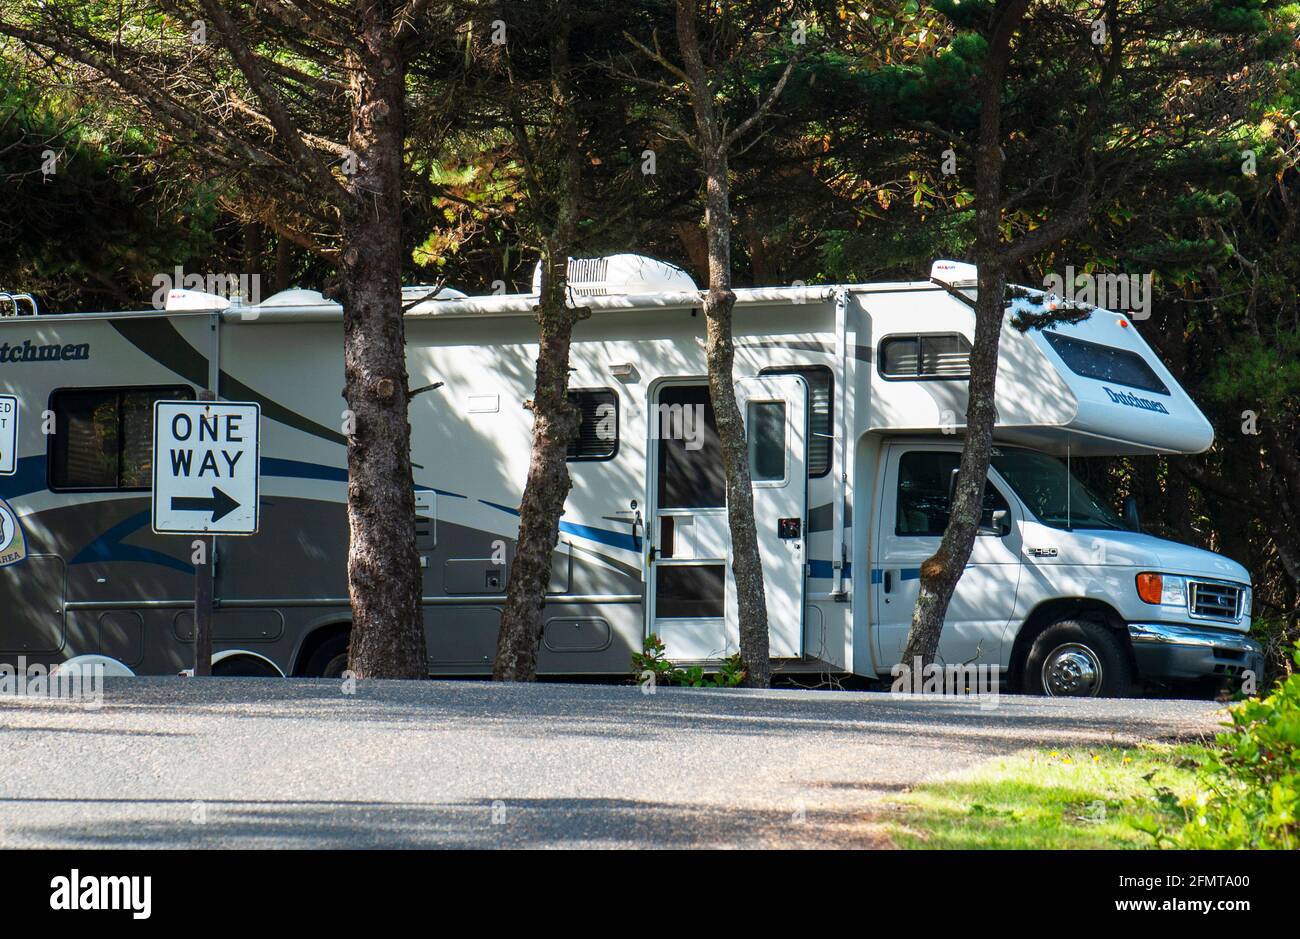 Class A Dutchman RV camper or motor home parked in a campsite at Harris Beach state park in Oregon, USA, off highway 101. Stock Photo